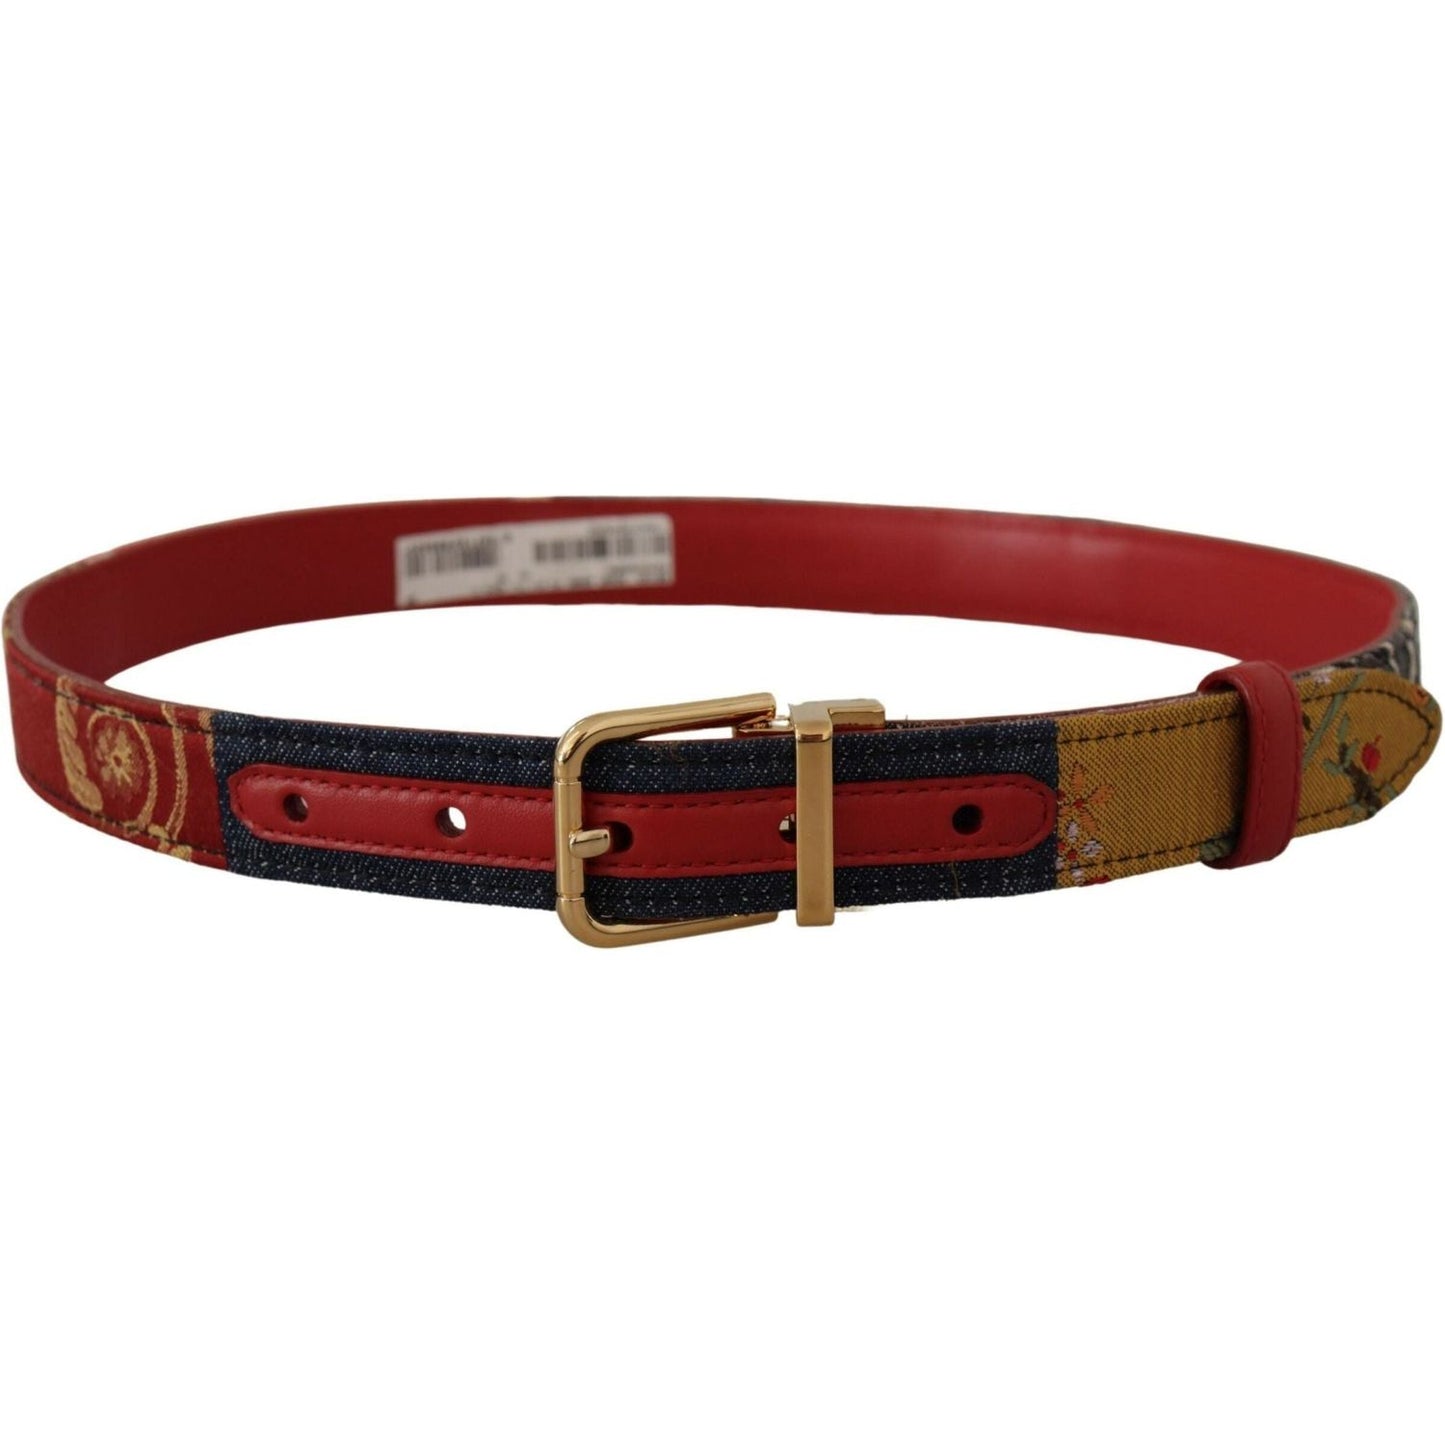 Dolce & Gabbana Chic Multicolor Leather Belt with Engraved Buckle multicolor-majolica-patchwork-gold-metal-buckle-belt